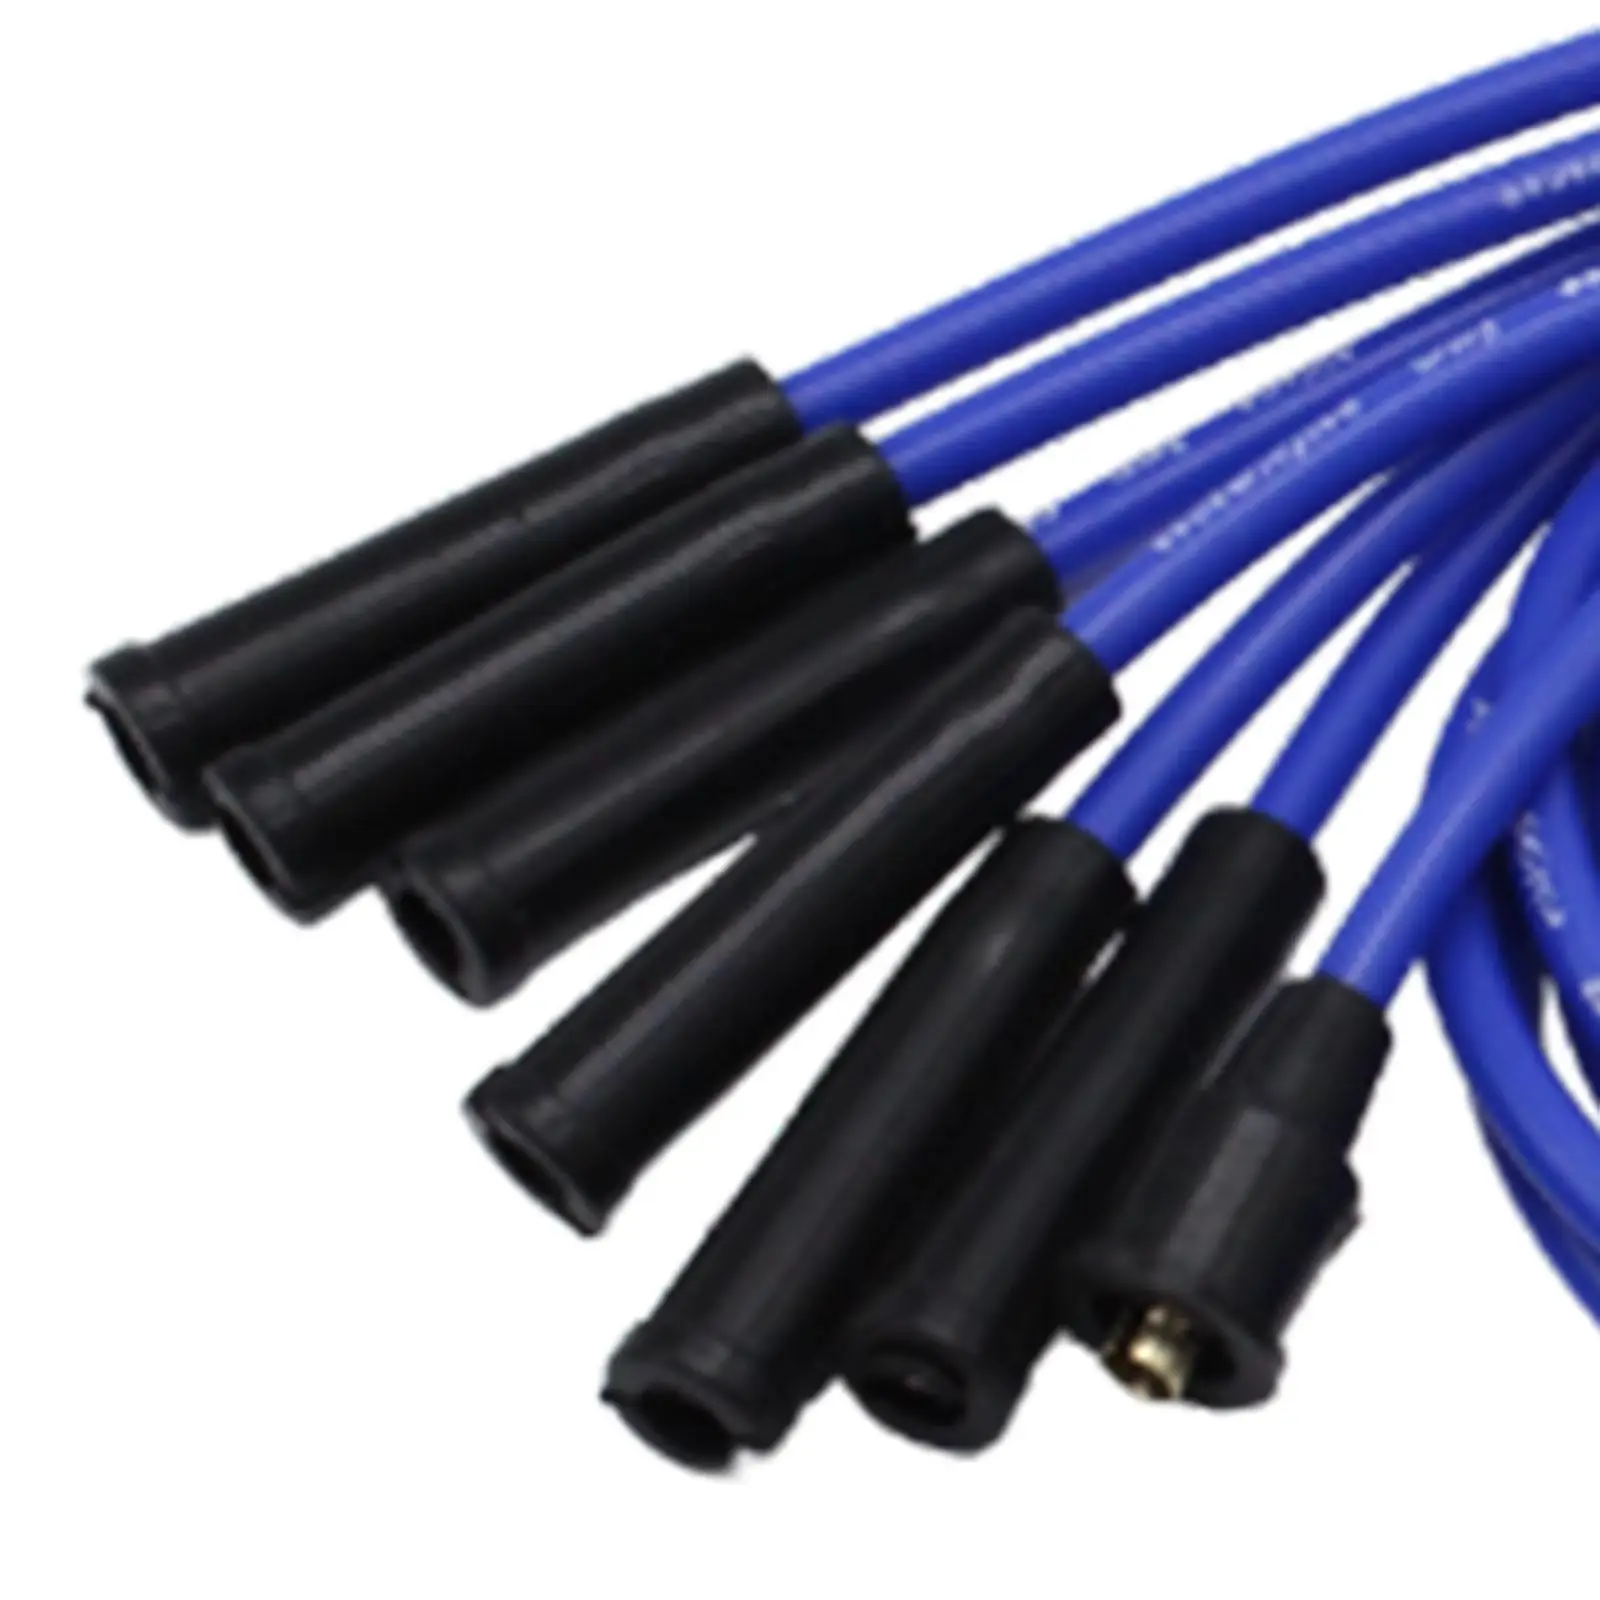 8mm HT Leads Spark Plug Wires Set for 6 Cylinder Accessories Durable